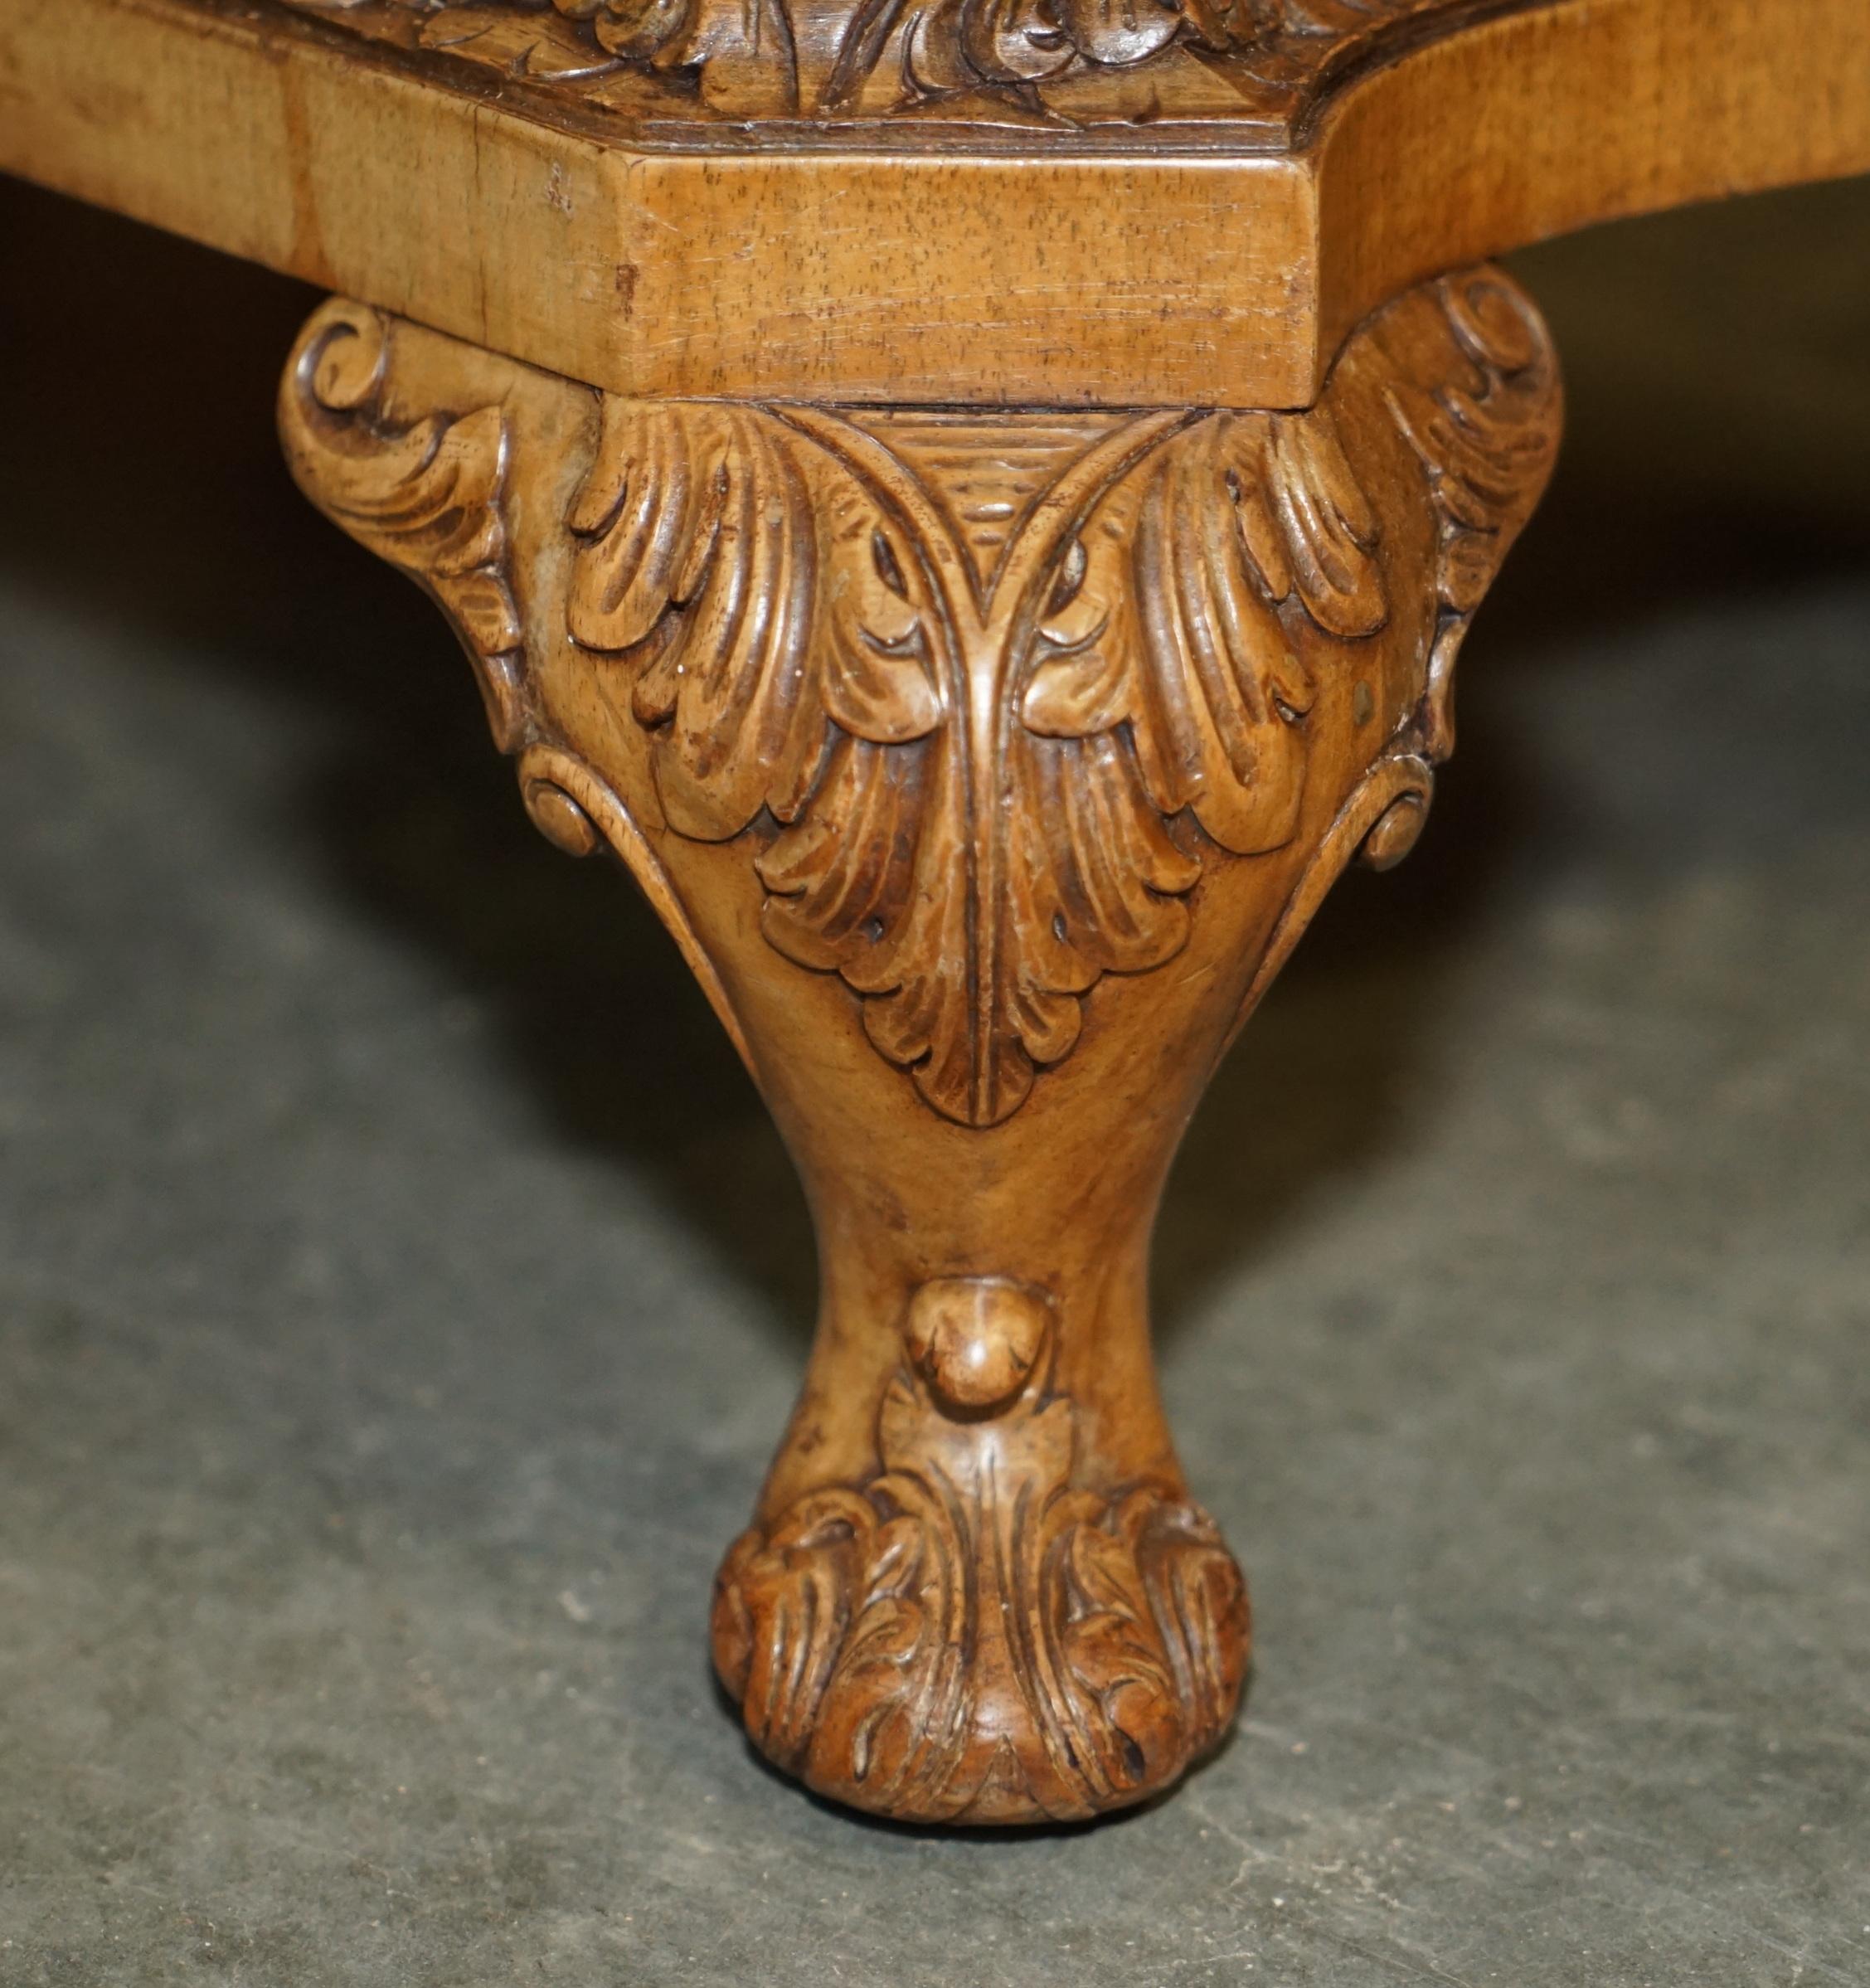 Sublime Quality Burr Walnut Hand Carved Dressing Table & Stool Part of Suite 1